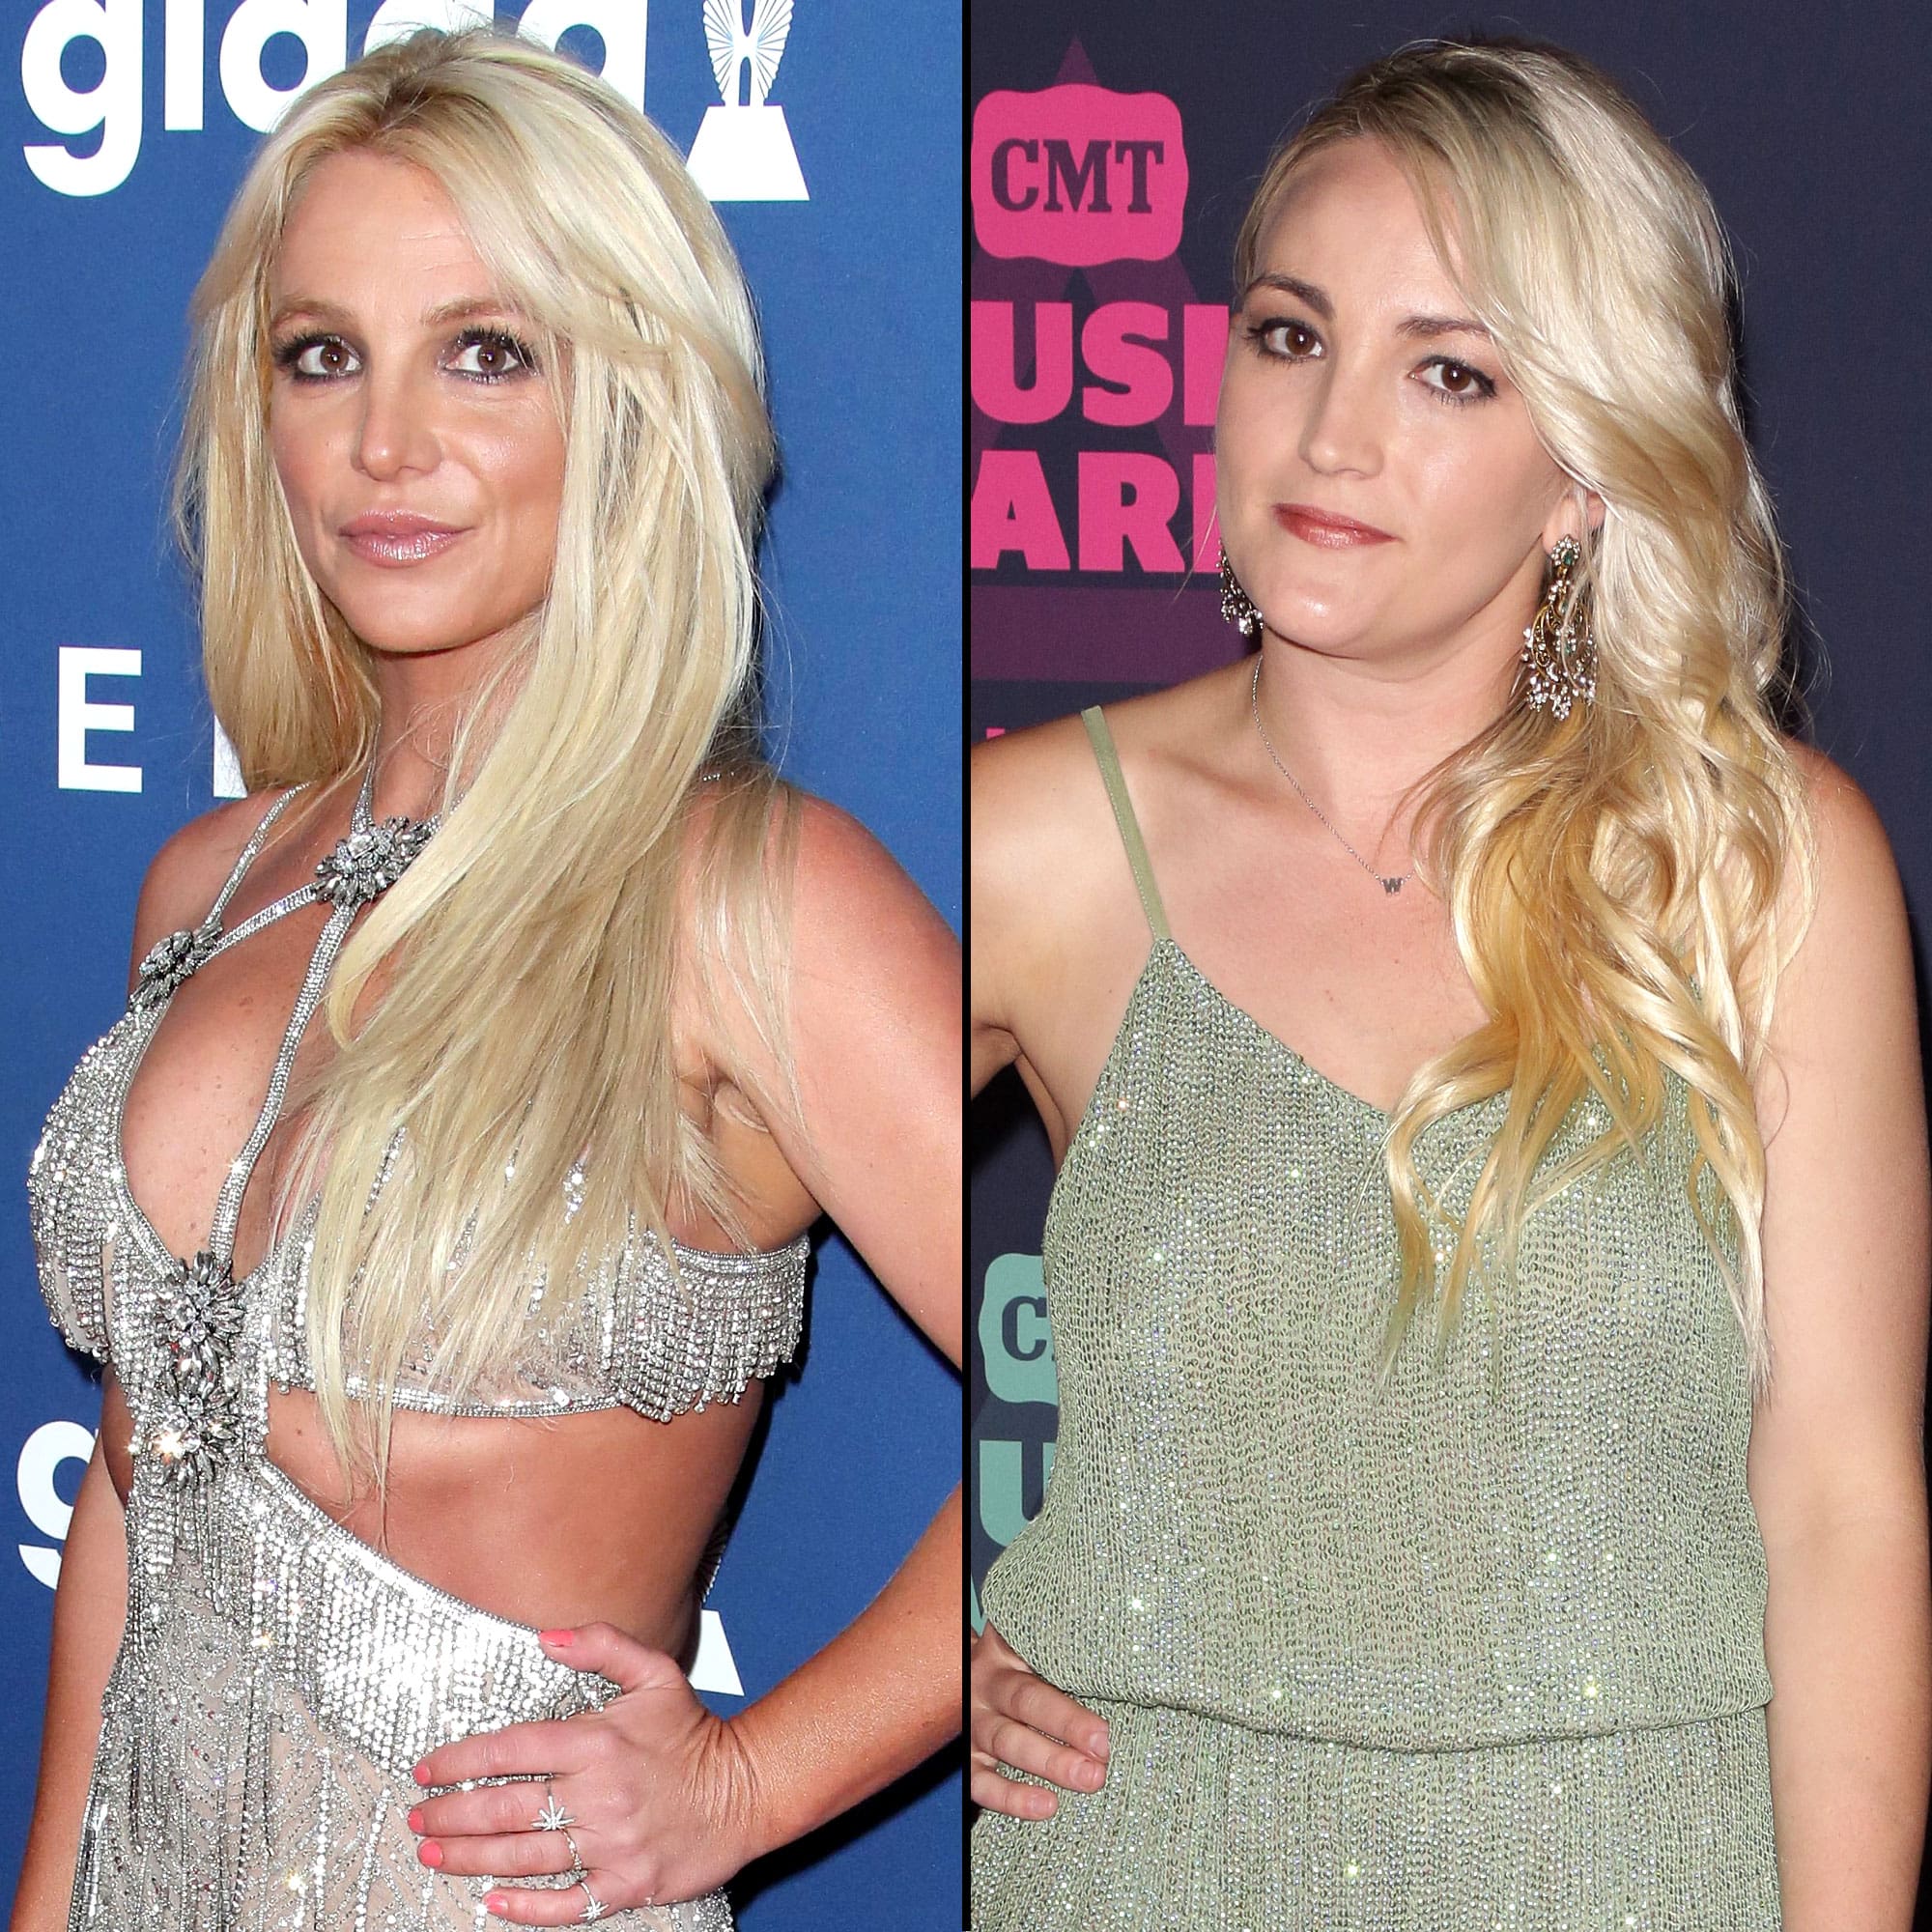 britney-spears-and-her-sister-continue-the-media-battle